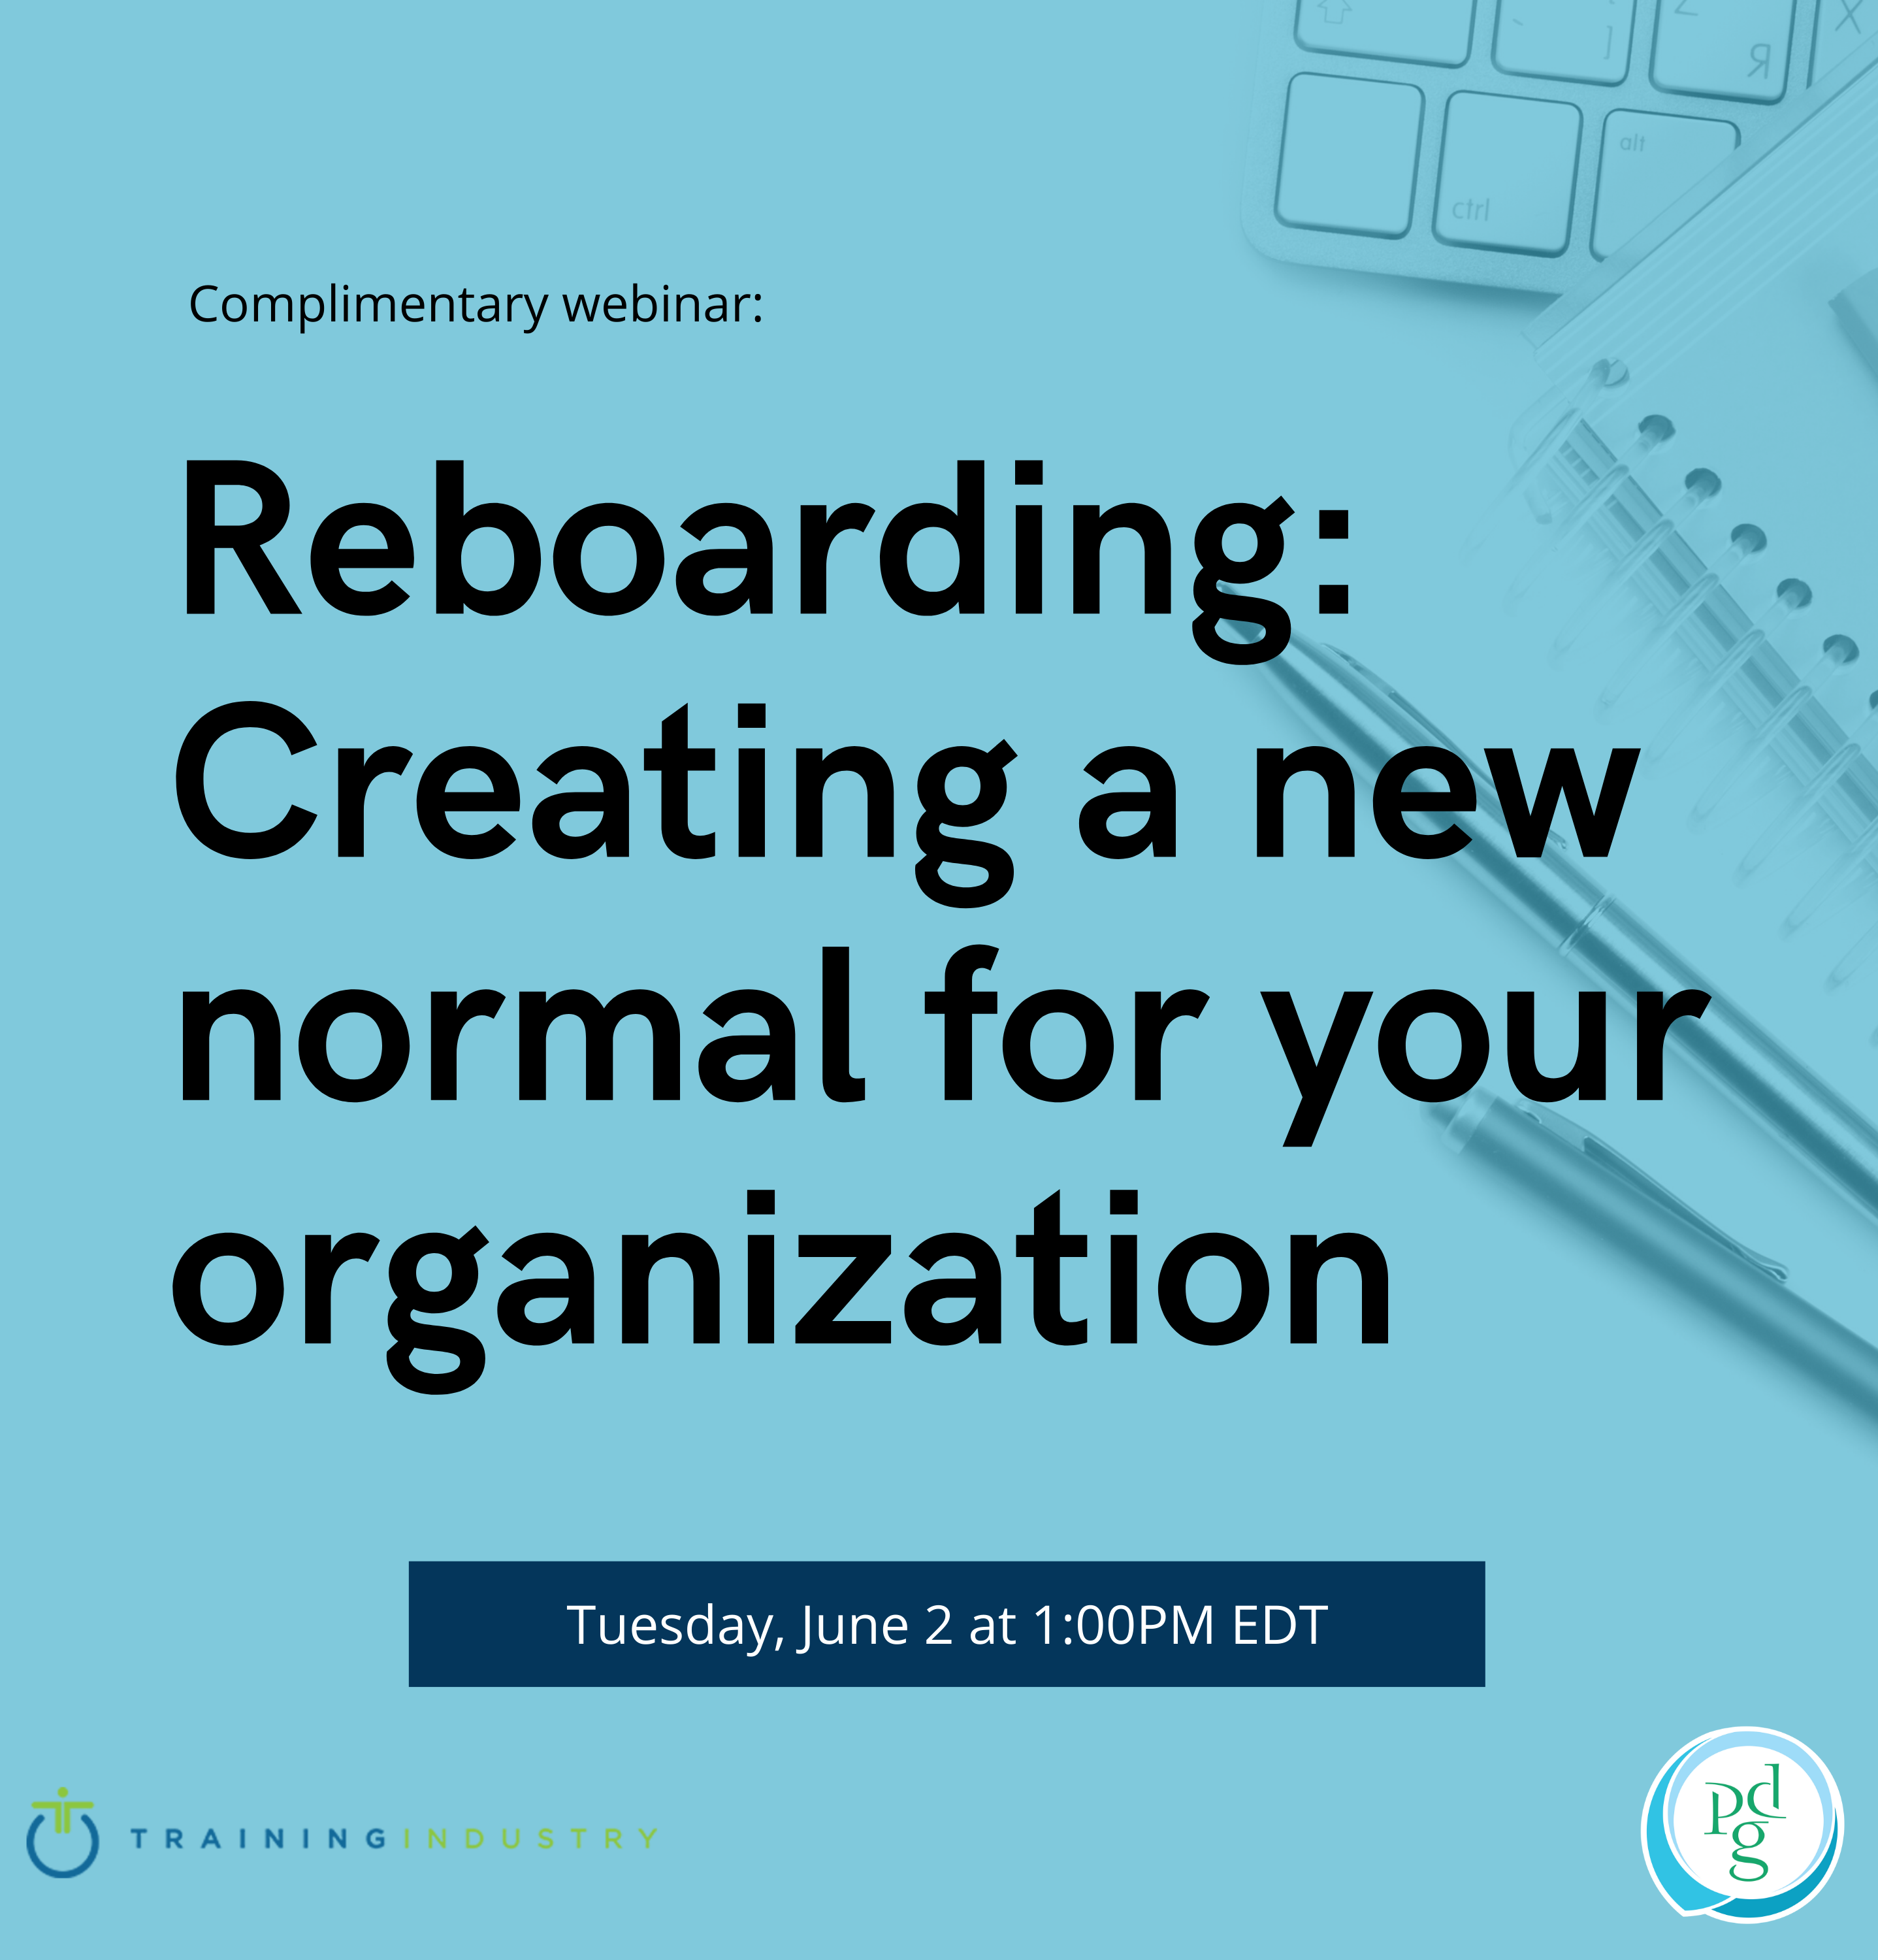 Reboarding: Creating a new normal for your organization